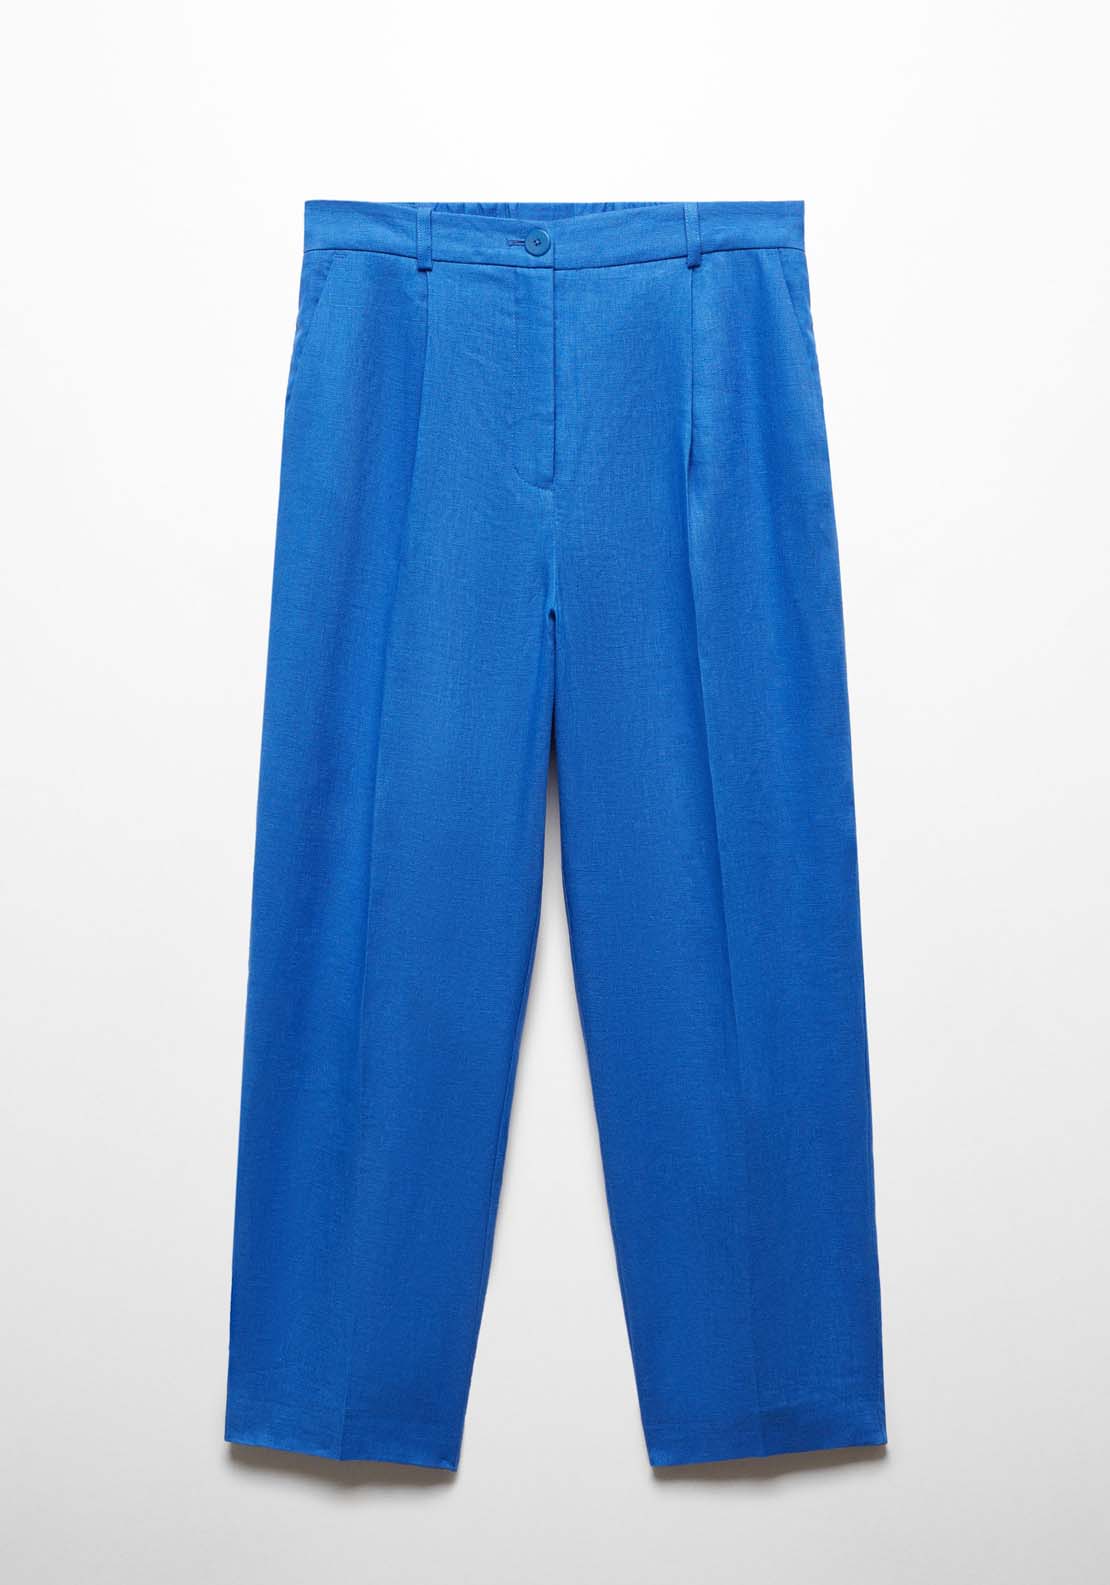 Mango 100% linen straight trousers - Blue 6 Shaws Department Stores